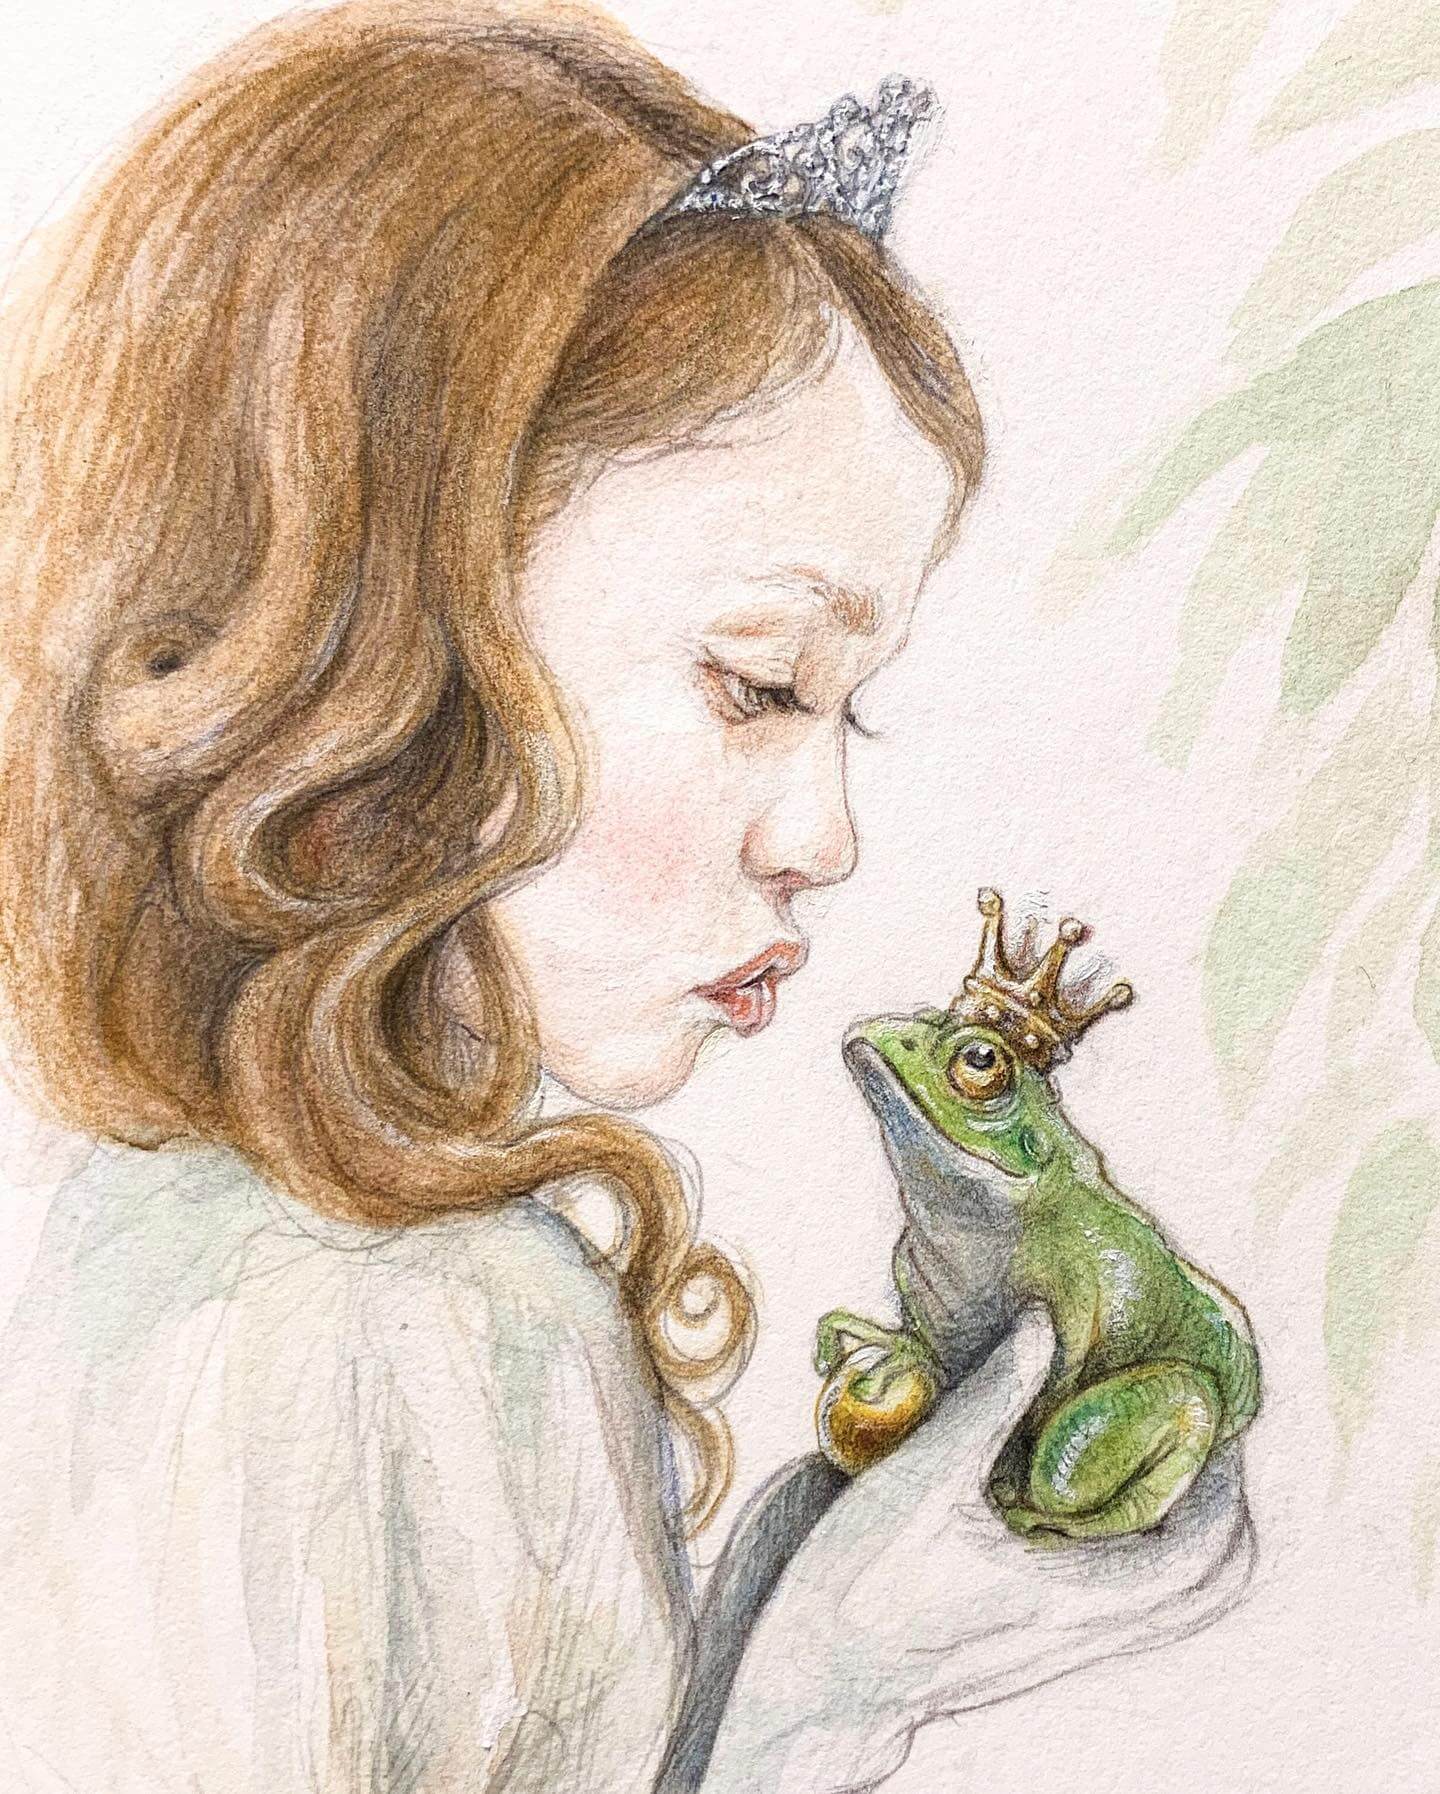 Painting in watercolors by Natacha Chohra, inspired from the tale "The Frog Prince", collected by the Brothers Grimm. The painting shows a beautiful princess preparing herself to kiss the frog that she holds in her hands. Both the princess and the frog have crown on their heads and they look in each other's eyes. 